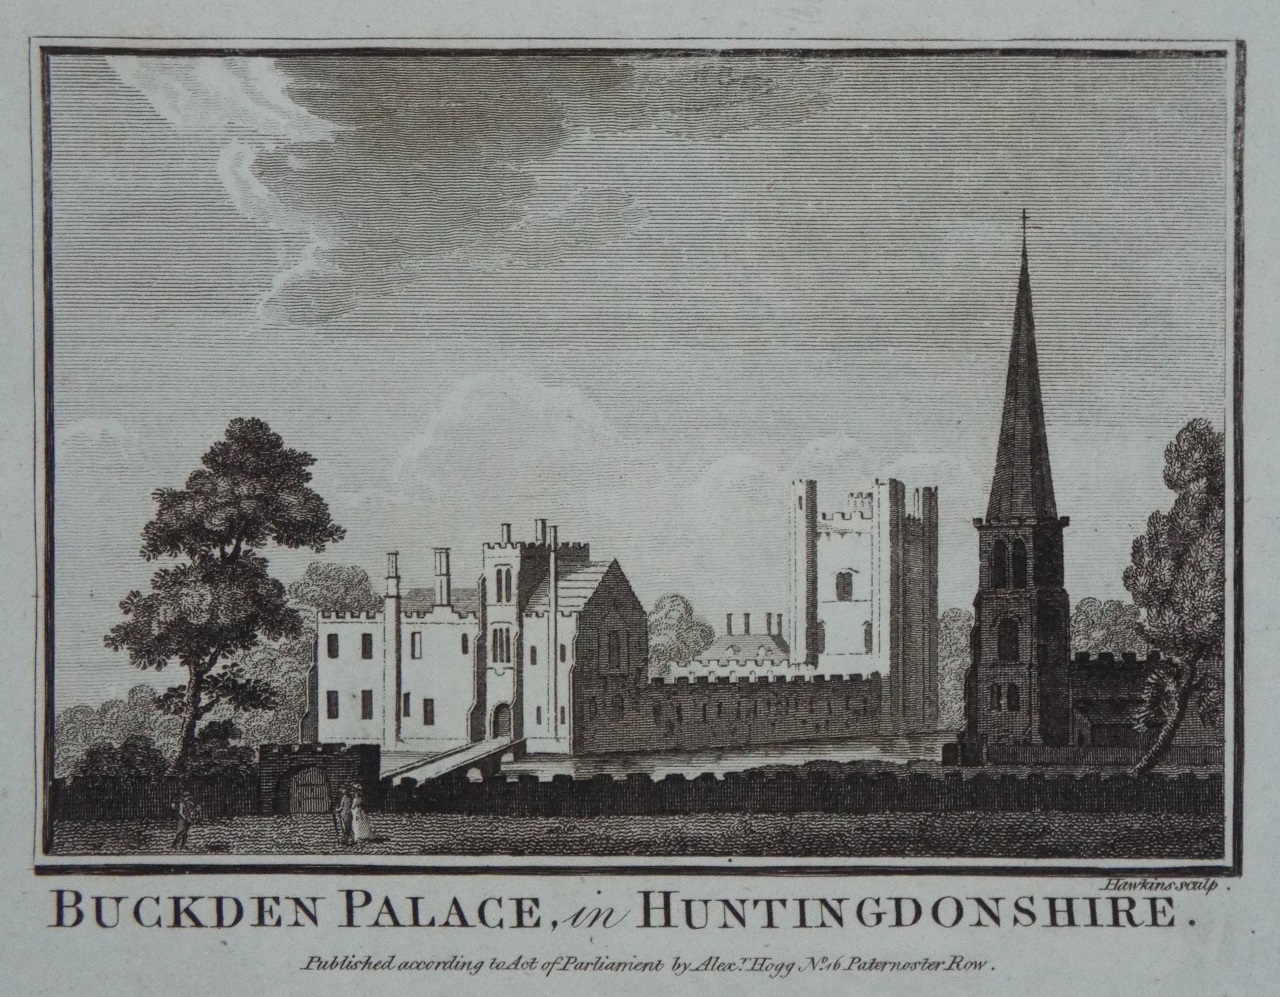 Print - Buckden Palace, in Huntingdonshire. - 